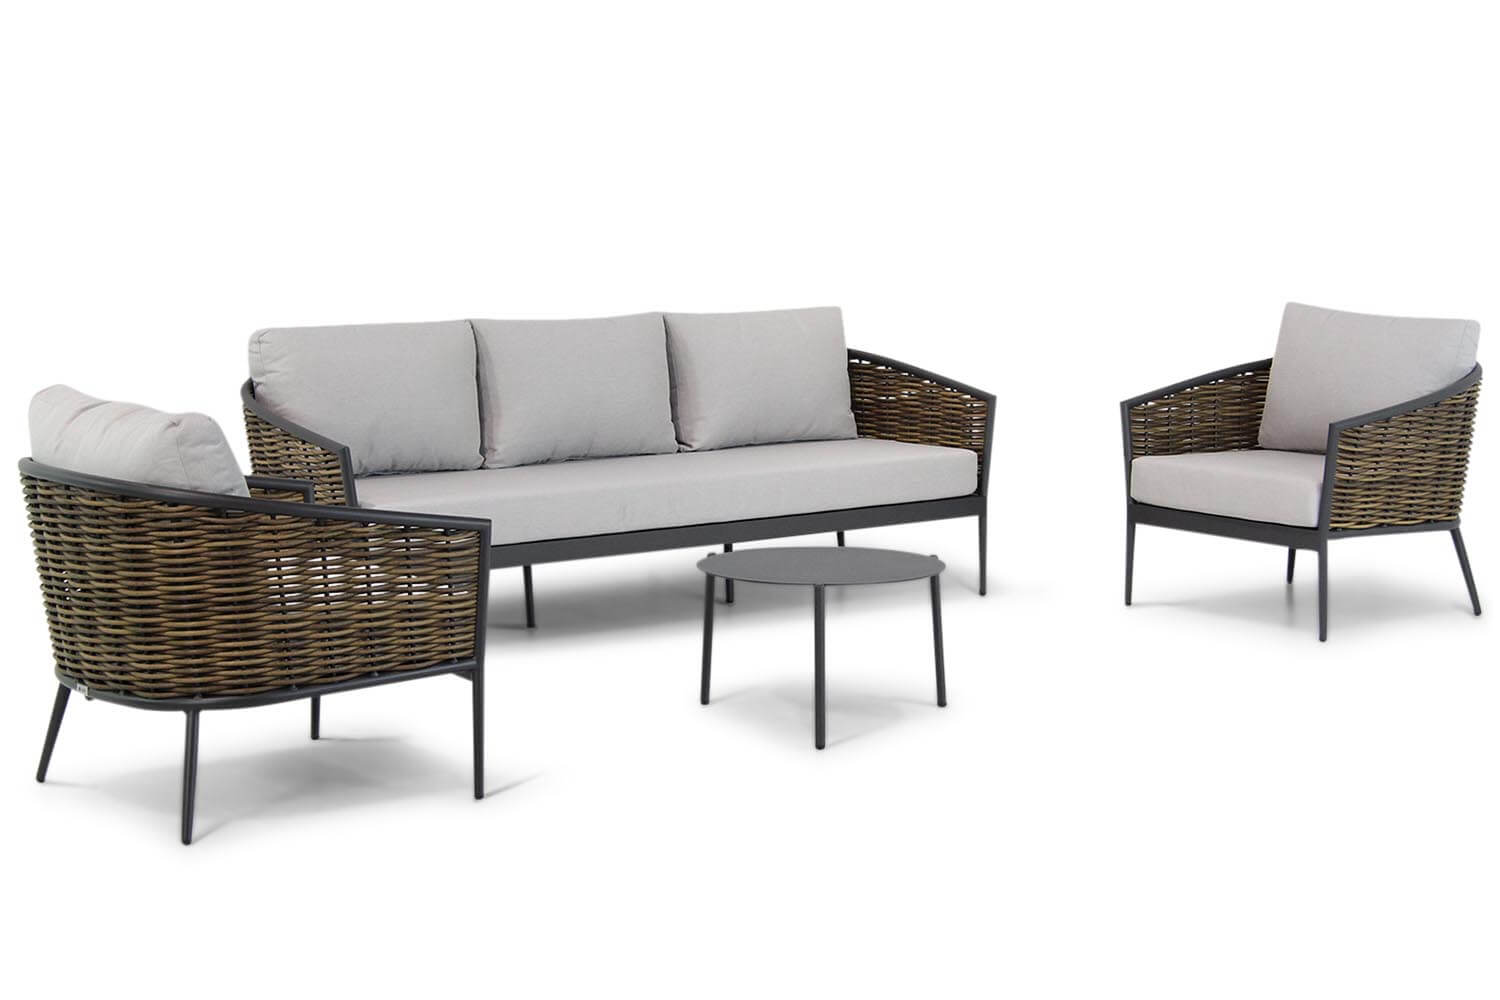 Aanbieding Coco Palm/Pacific 60 cm stoel-bank loungeset 4-delig